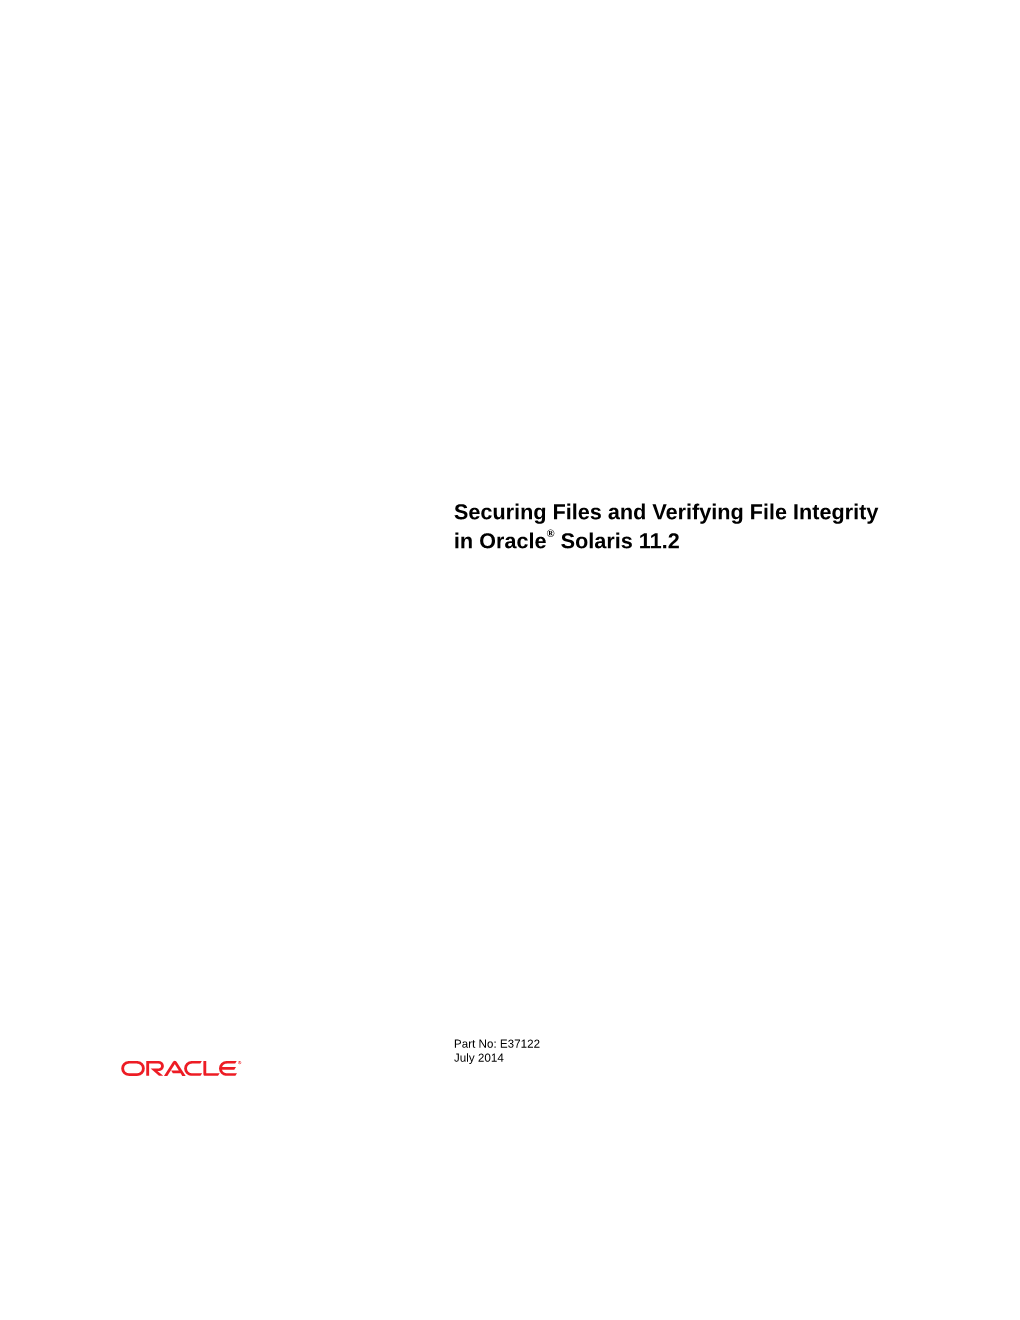 Securing Files and Verifying File Integrity in Oracle® Solaris 11.2